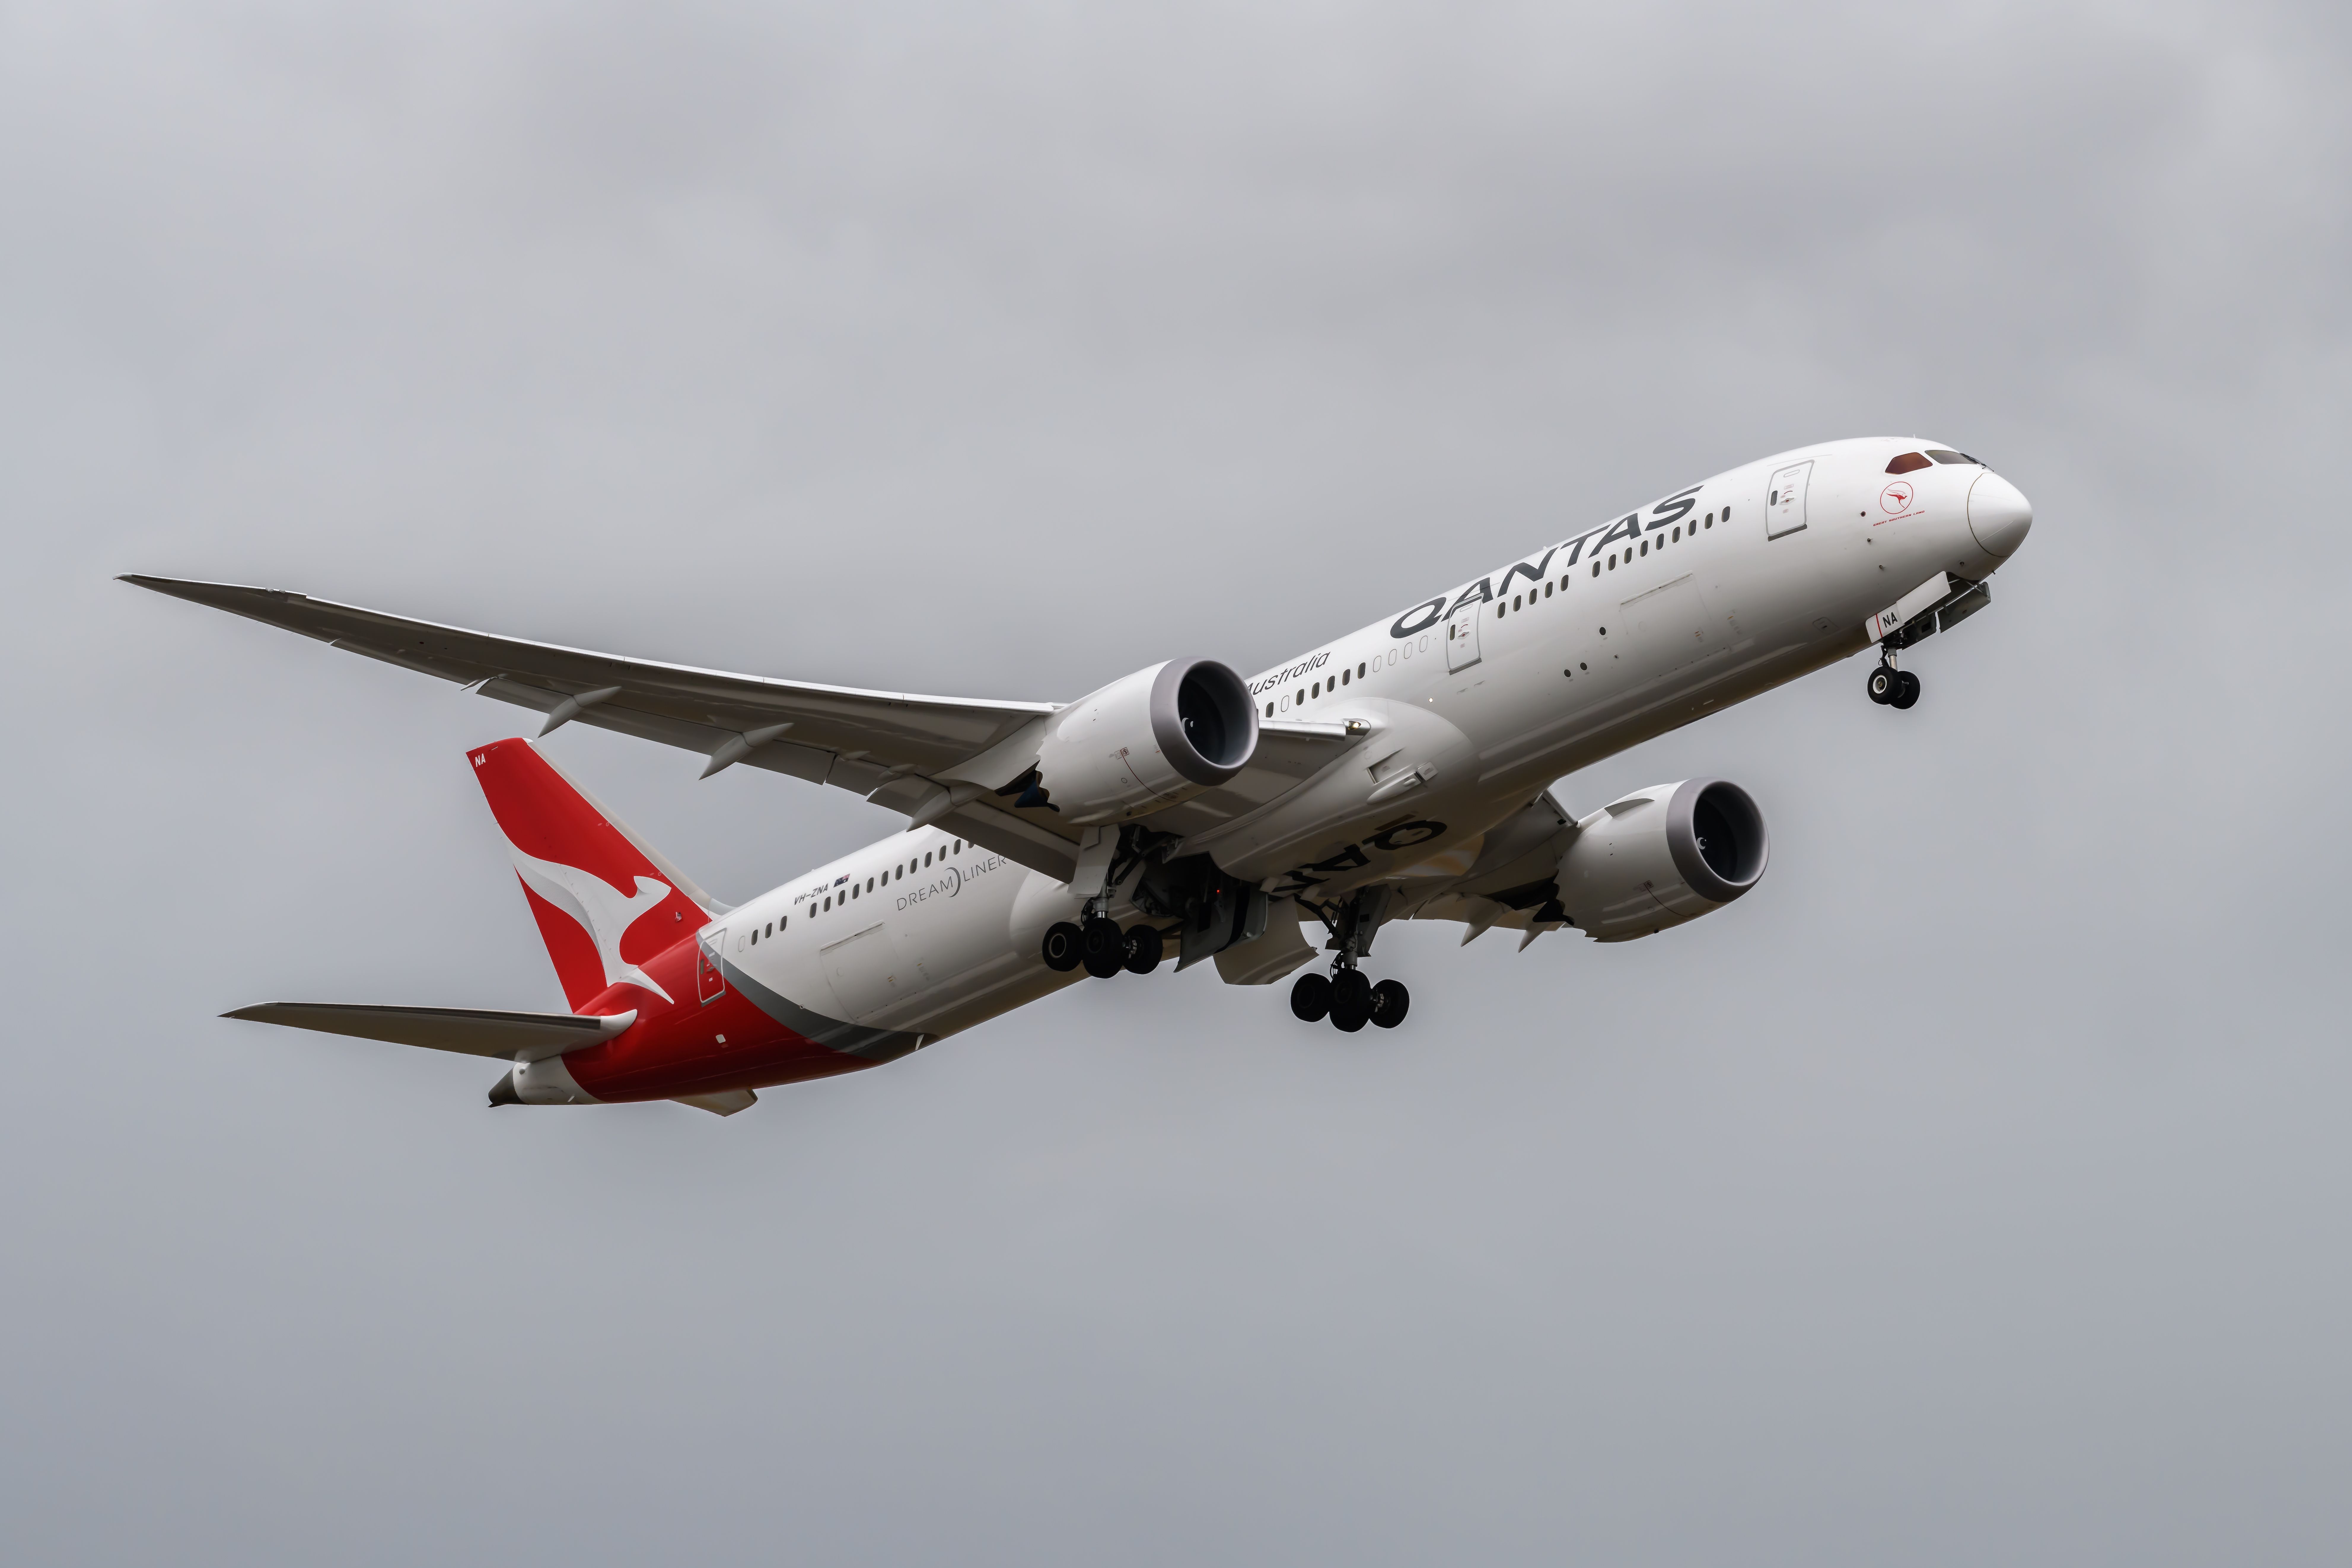 No More New Dreamliners: Qantas Takes Delivery Of Its 14th And Final 787-9